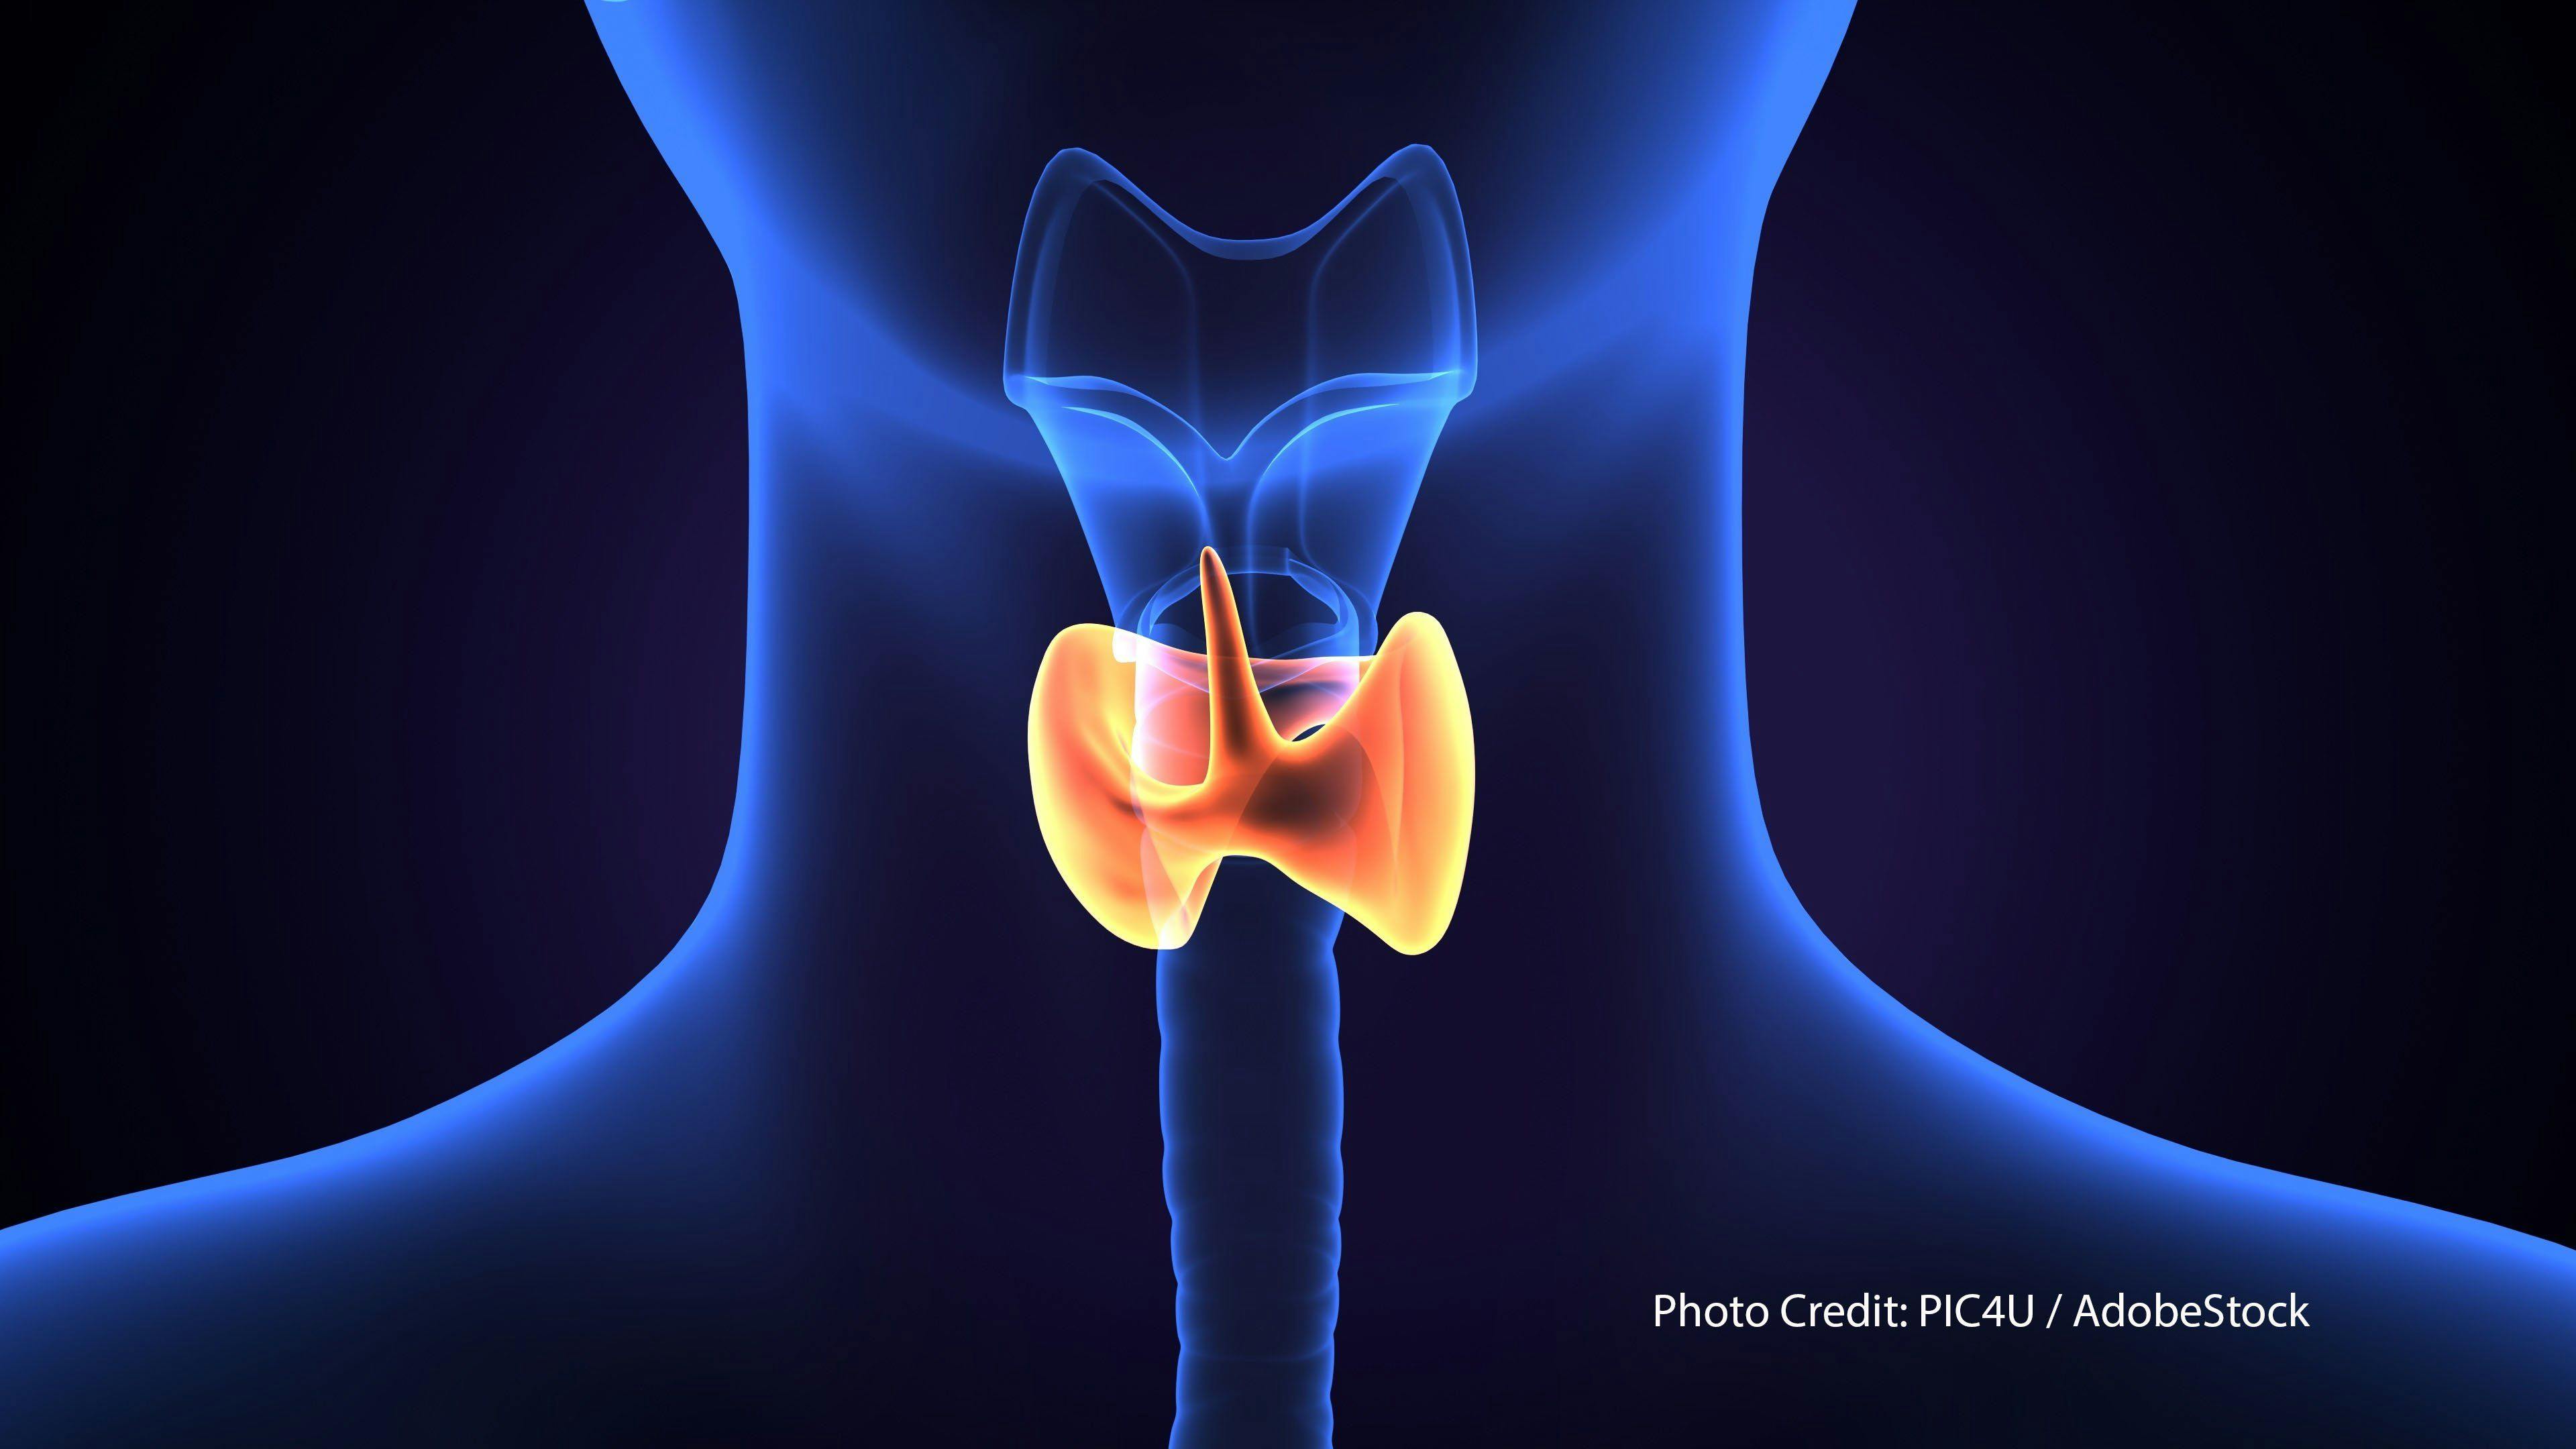 New Study Looks at Selumetinib for Treating Differentiated Thyroid Cancer